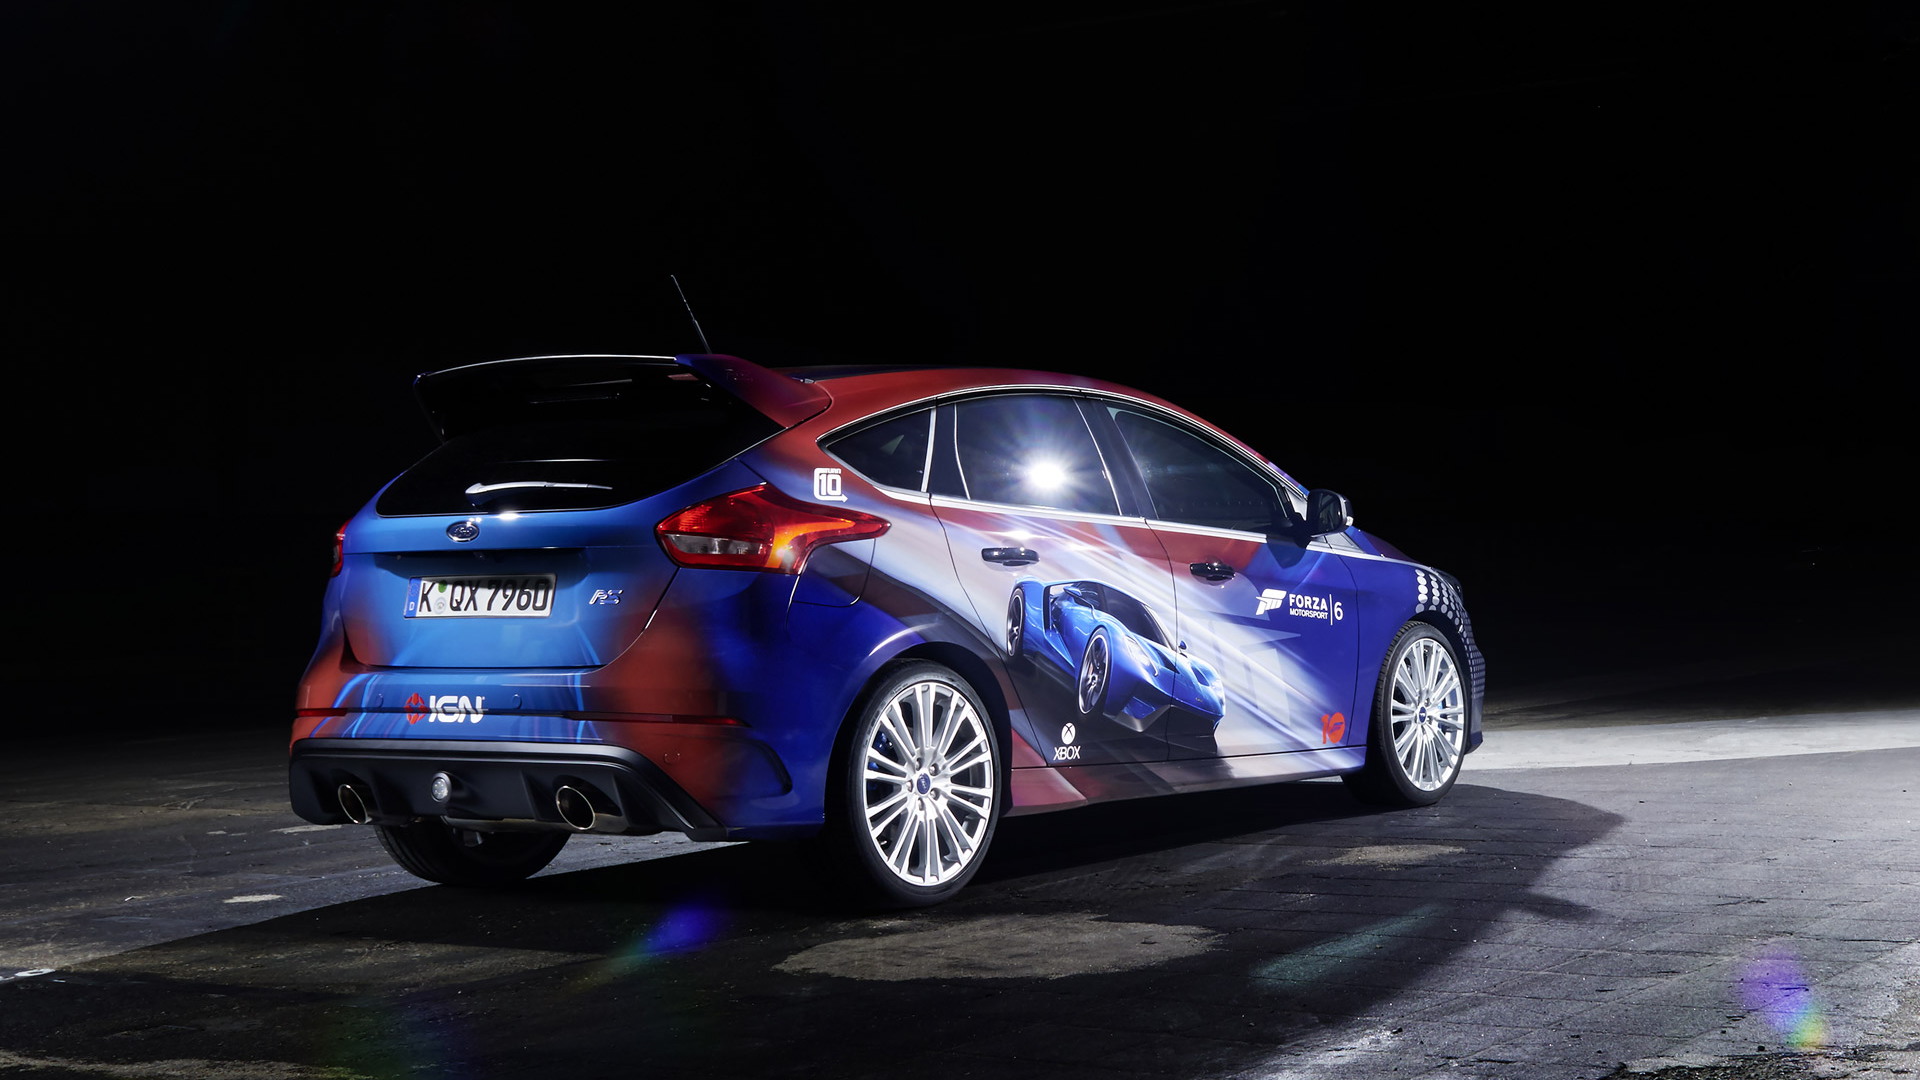 One-off Ford Focus RS with livery designed by Forza Motorsport gamers